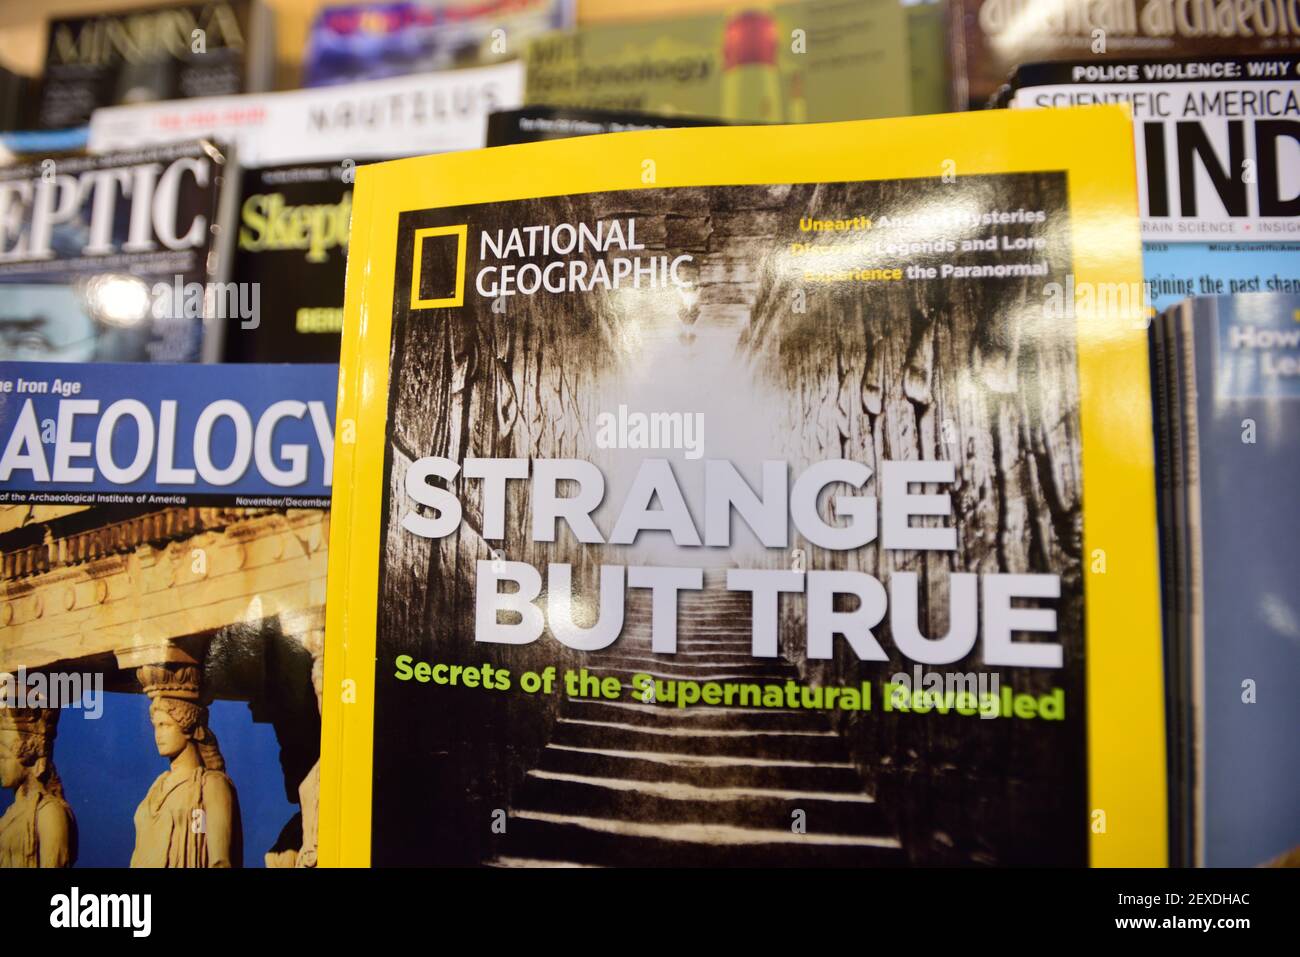 The current issue of National Geographic for sale at Powell's City of Books in Portland, Ore., on November 3, 2015. In September, 21st Century Fox expanded its partnership with National Geographic Society, taking a 73% share in the now for-profit venture and the organization has seen the largest amount of layoffs in its 127-year history. (Photo by Alex Milan Tracy) *** Please Use Credit from Credit Field *** Stock Photo